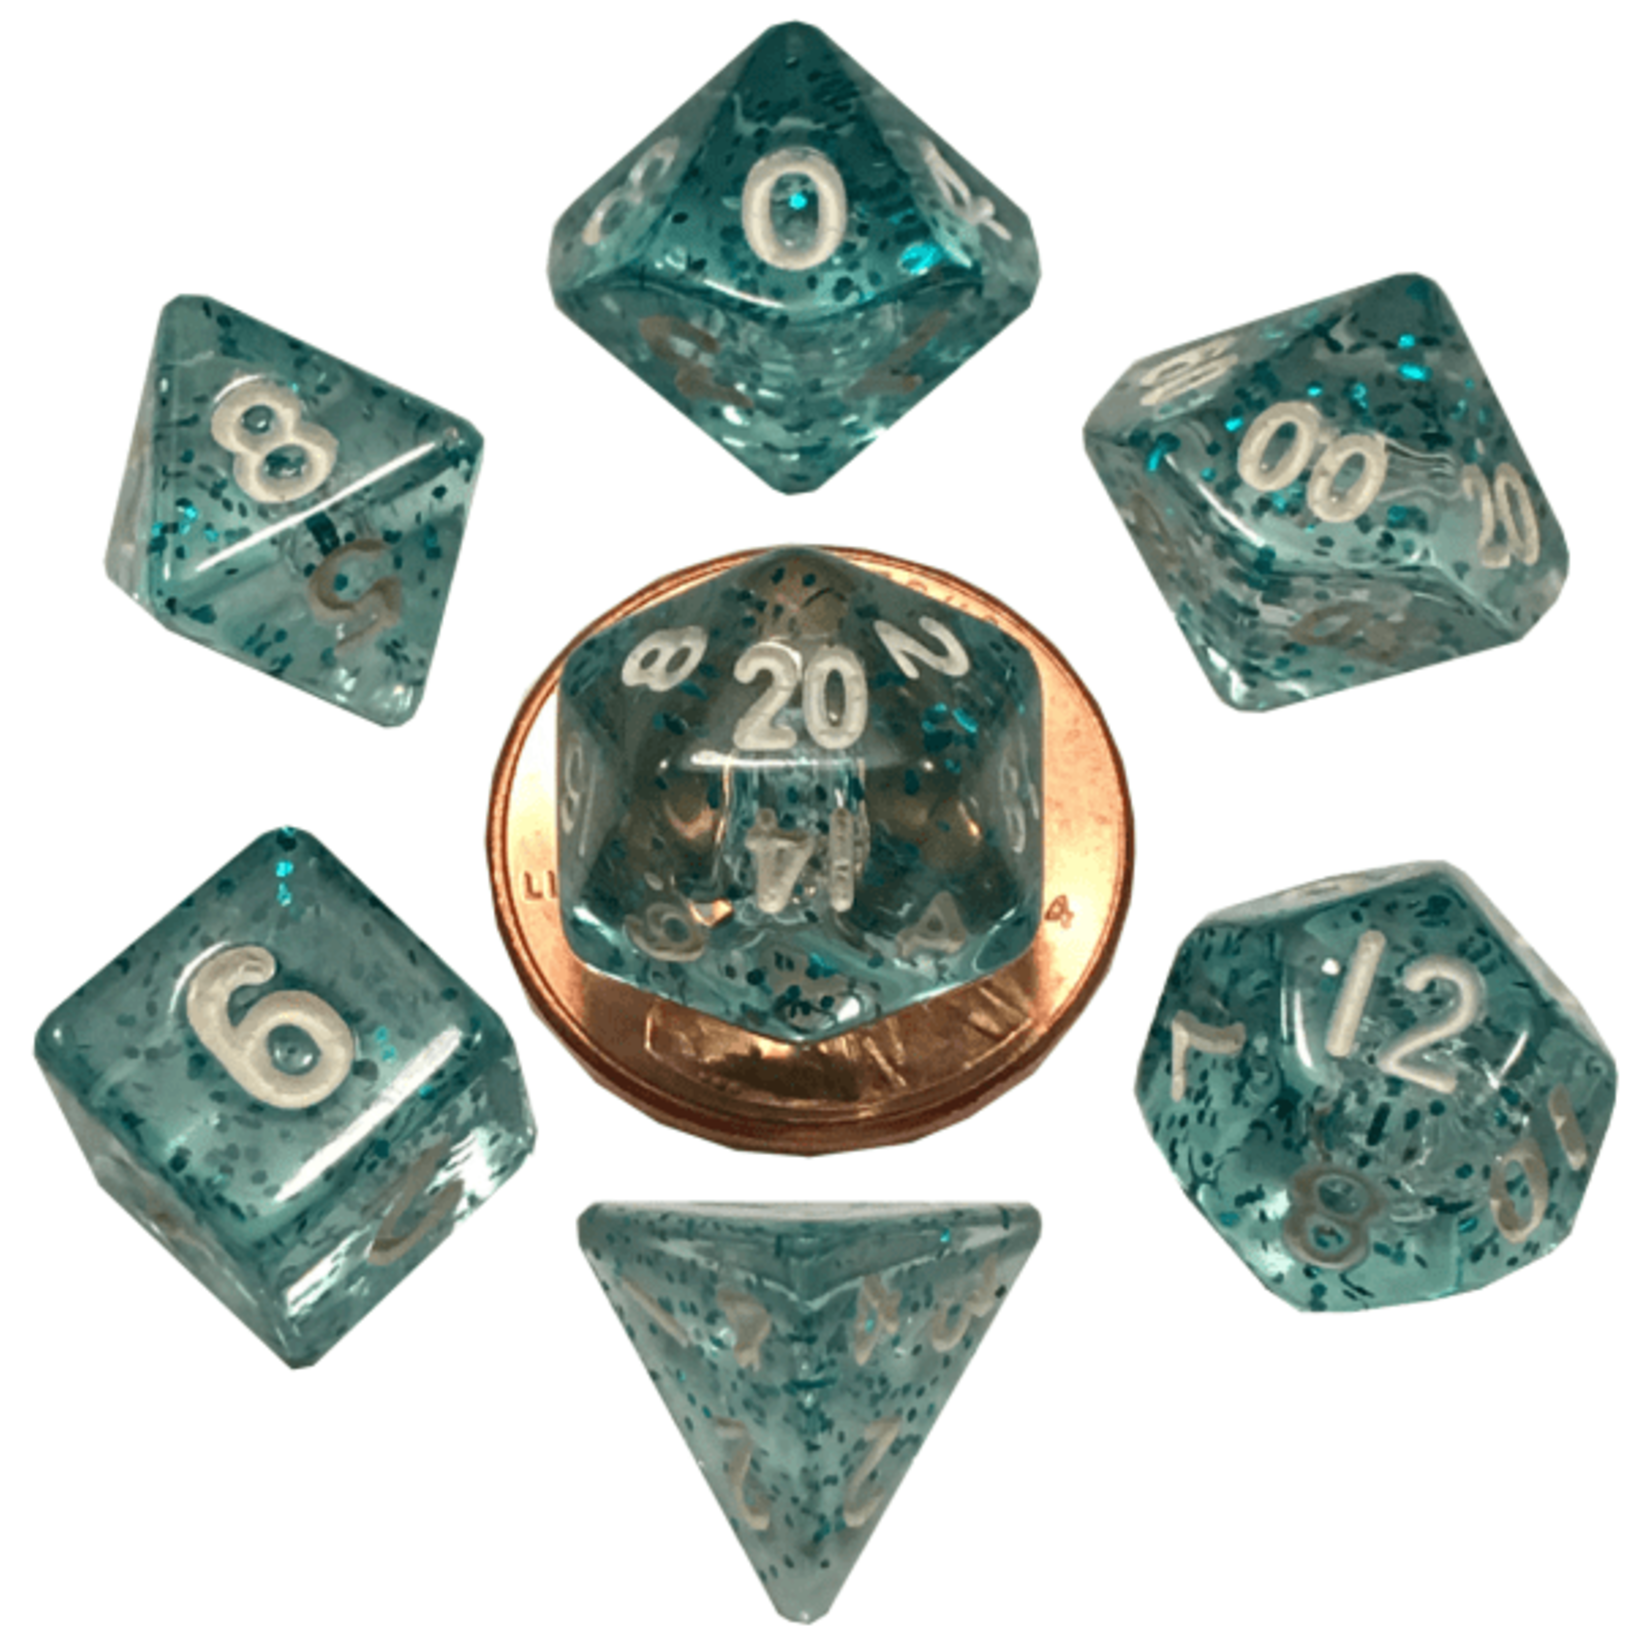 Metallic Dice Games 7-Piece Mini Dice Set: Ethereal Light Blue with White Numbers (10mm)